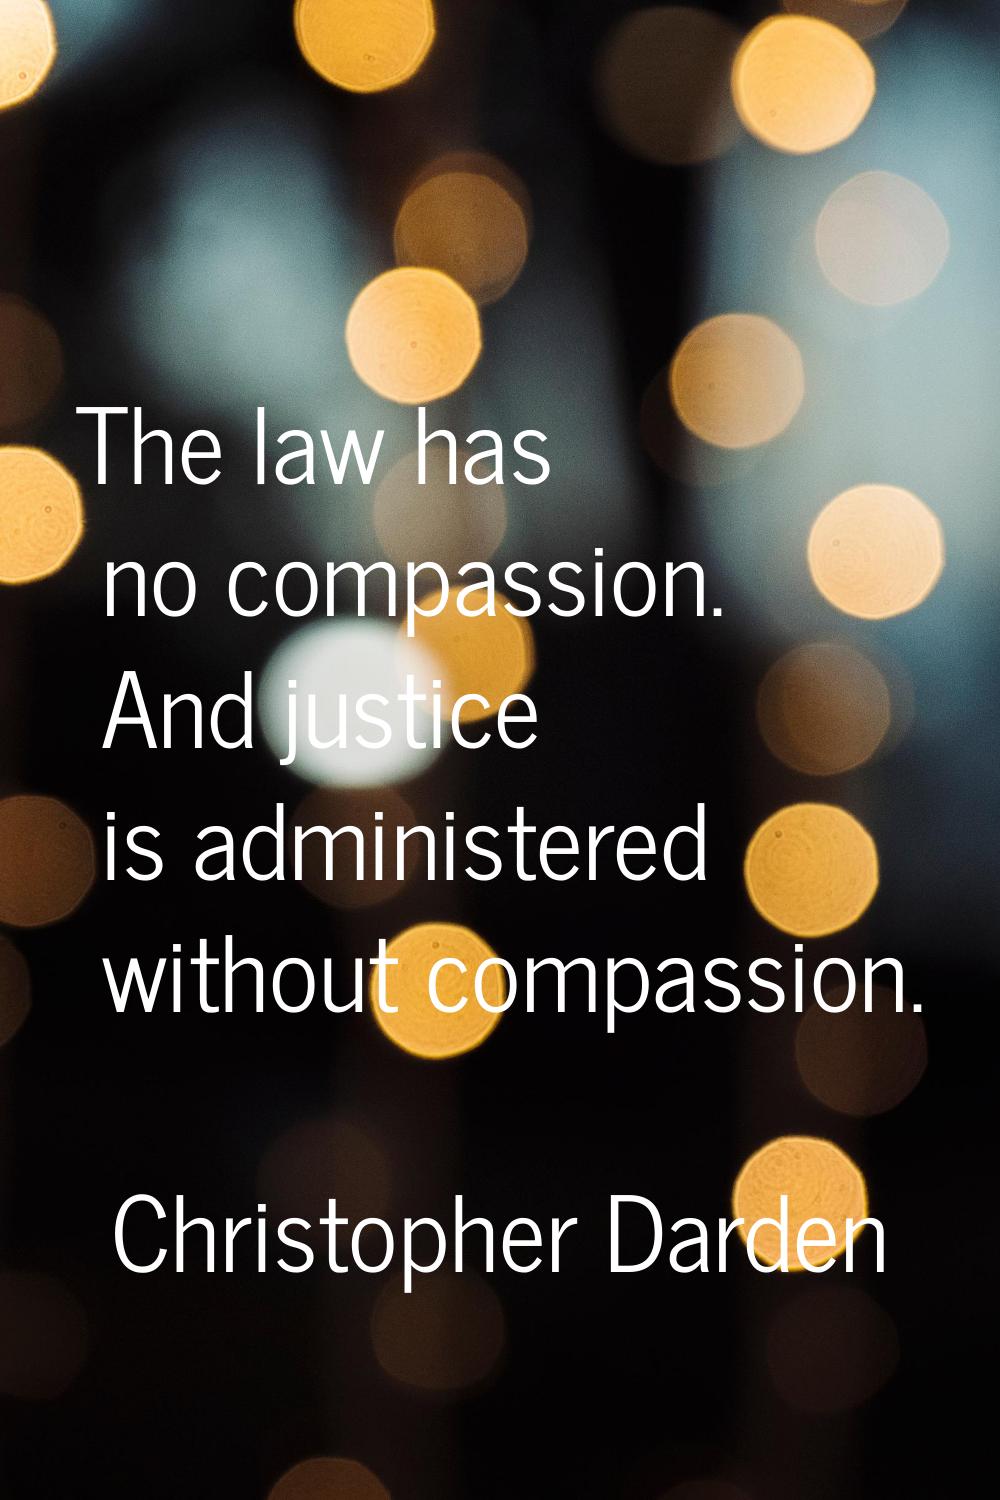 The law has no compassion. And justice is administered without compassion.